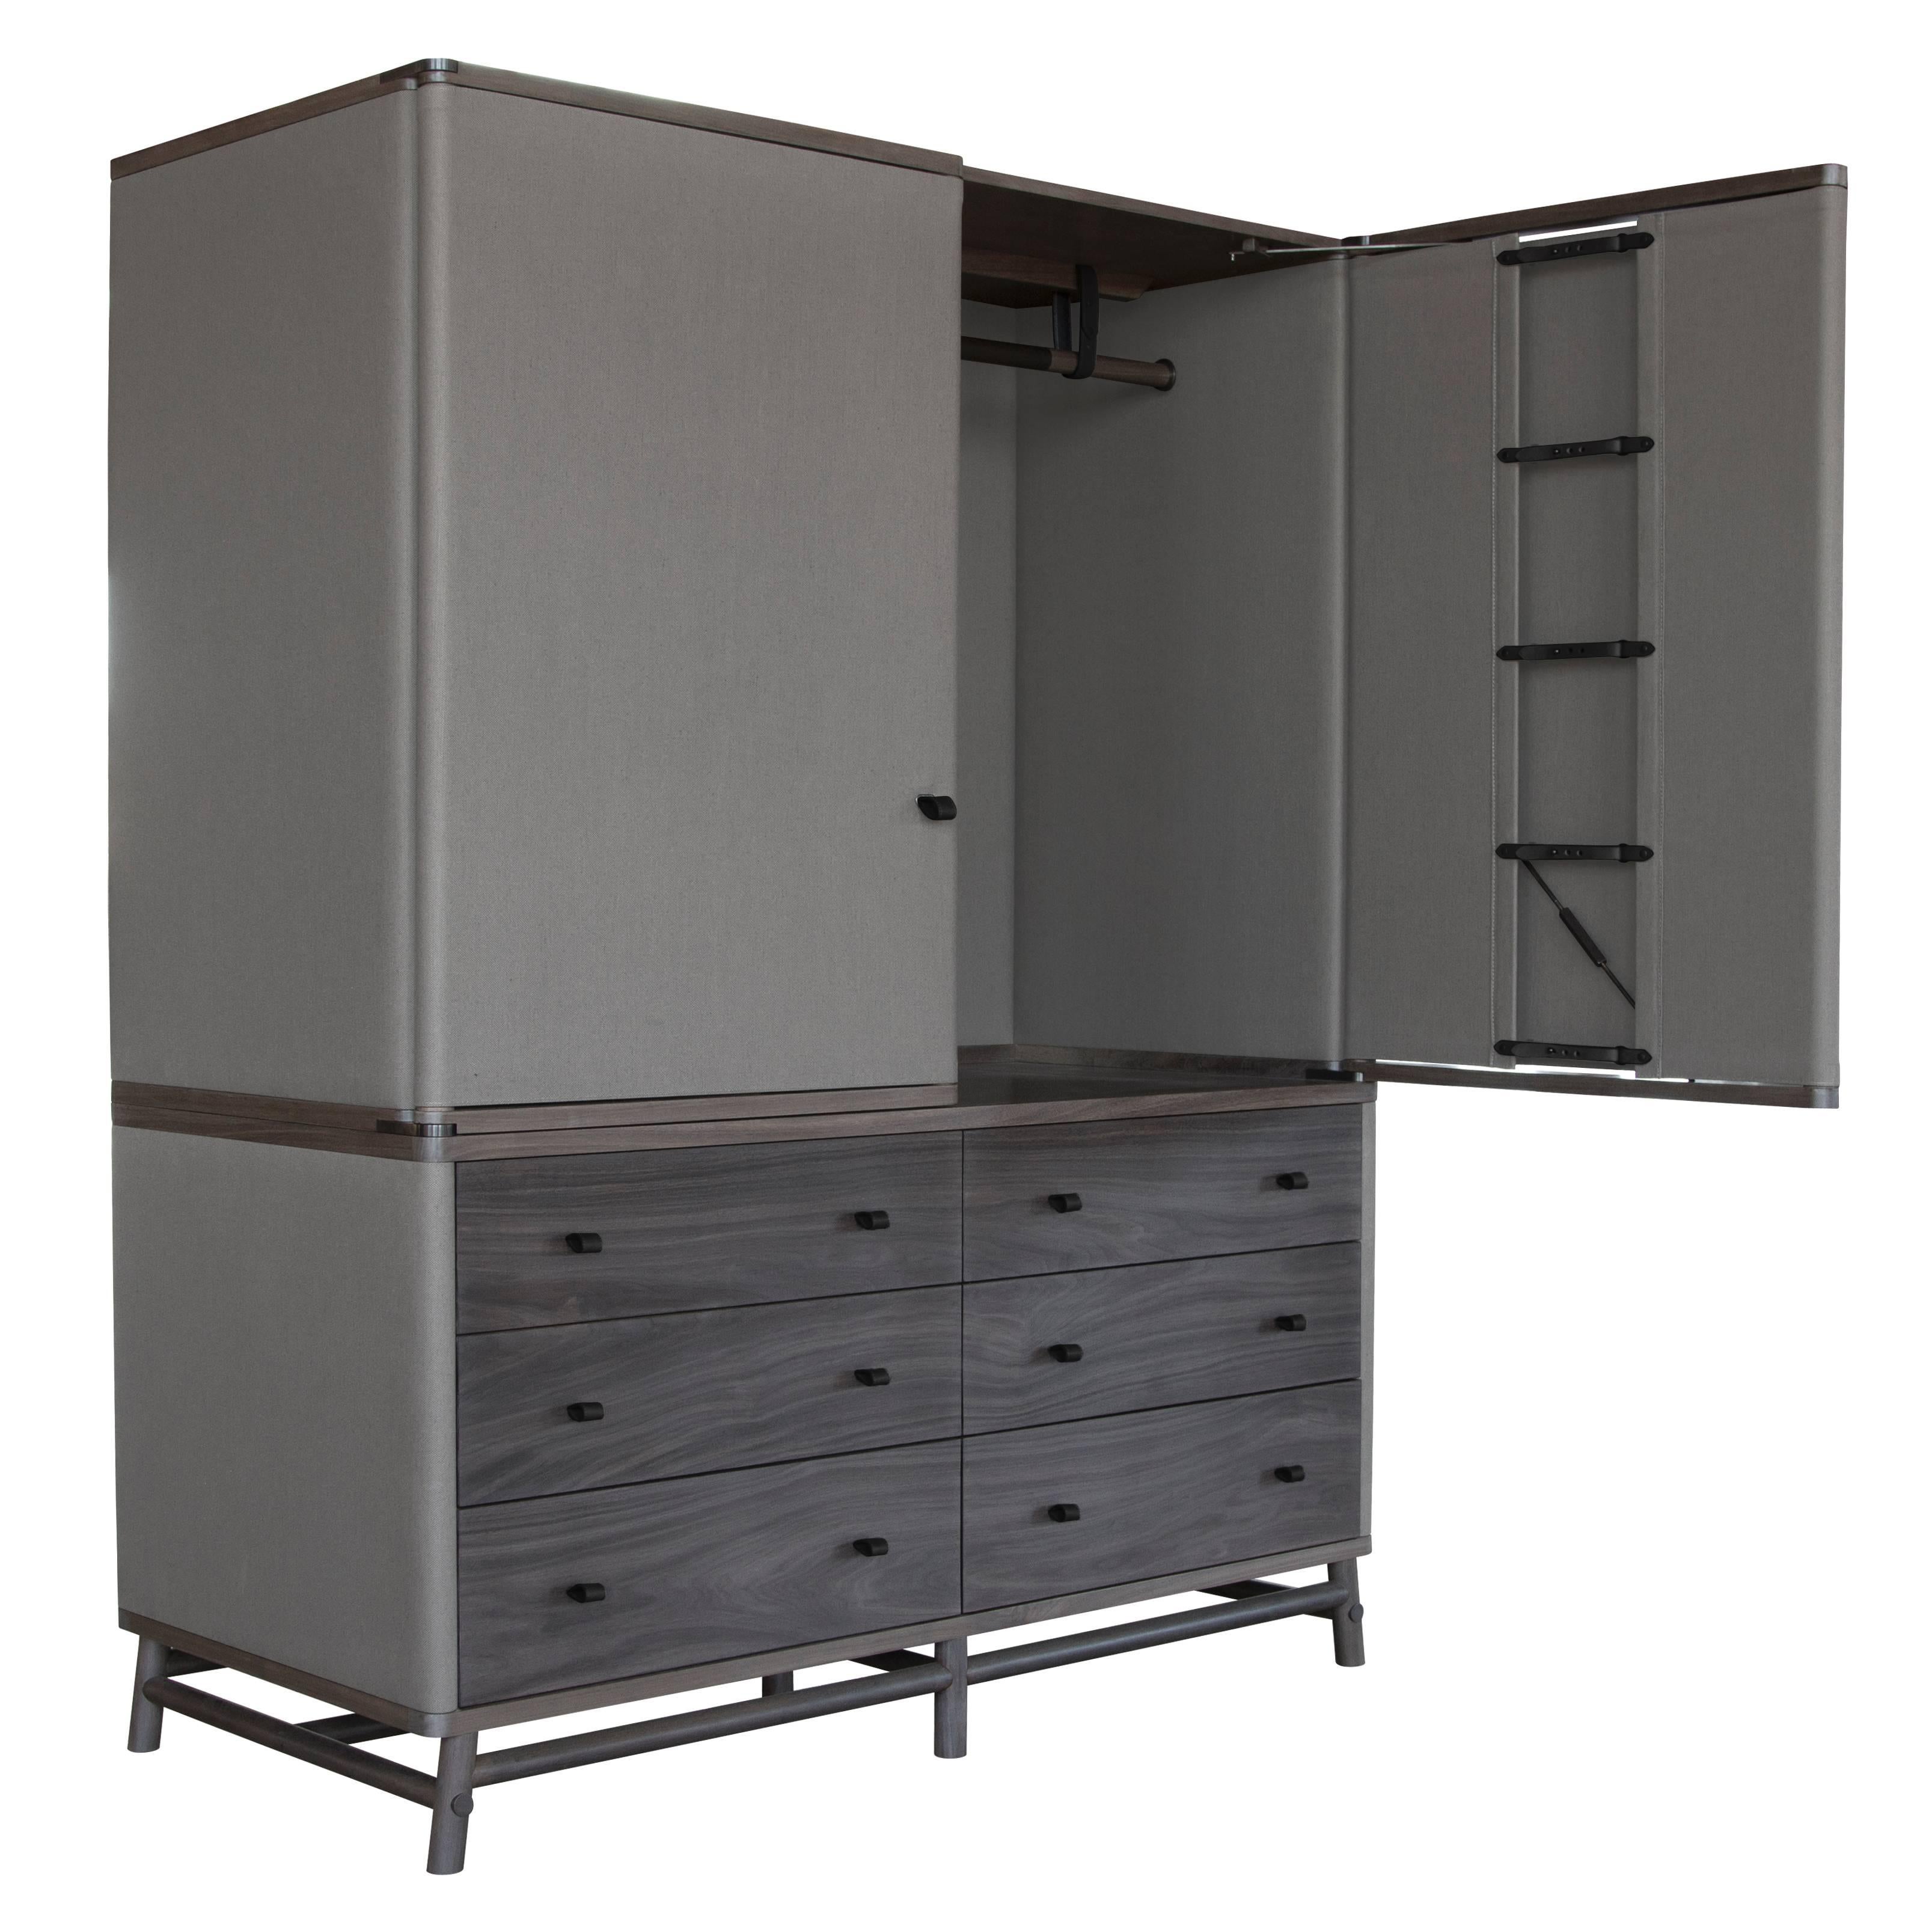 The Lambert armoire in silver grey walnut, Limonta Canvas No. 8 with Moore & Giles: Valhalla / Graphite leather strapping. 
Drawers constructed with under-mounted soft drawer glides.

The modern campaign collection by Richard Wrightman combines the